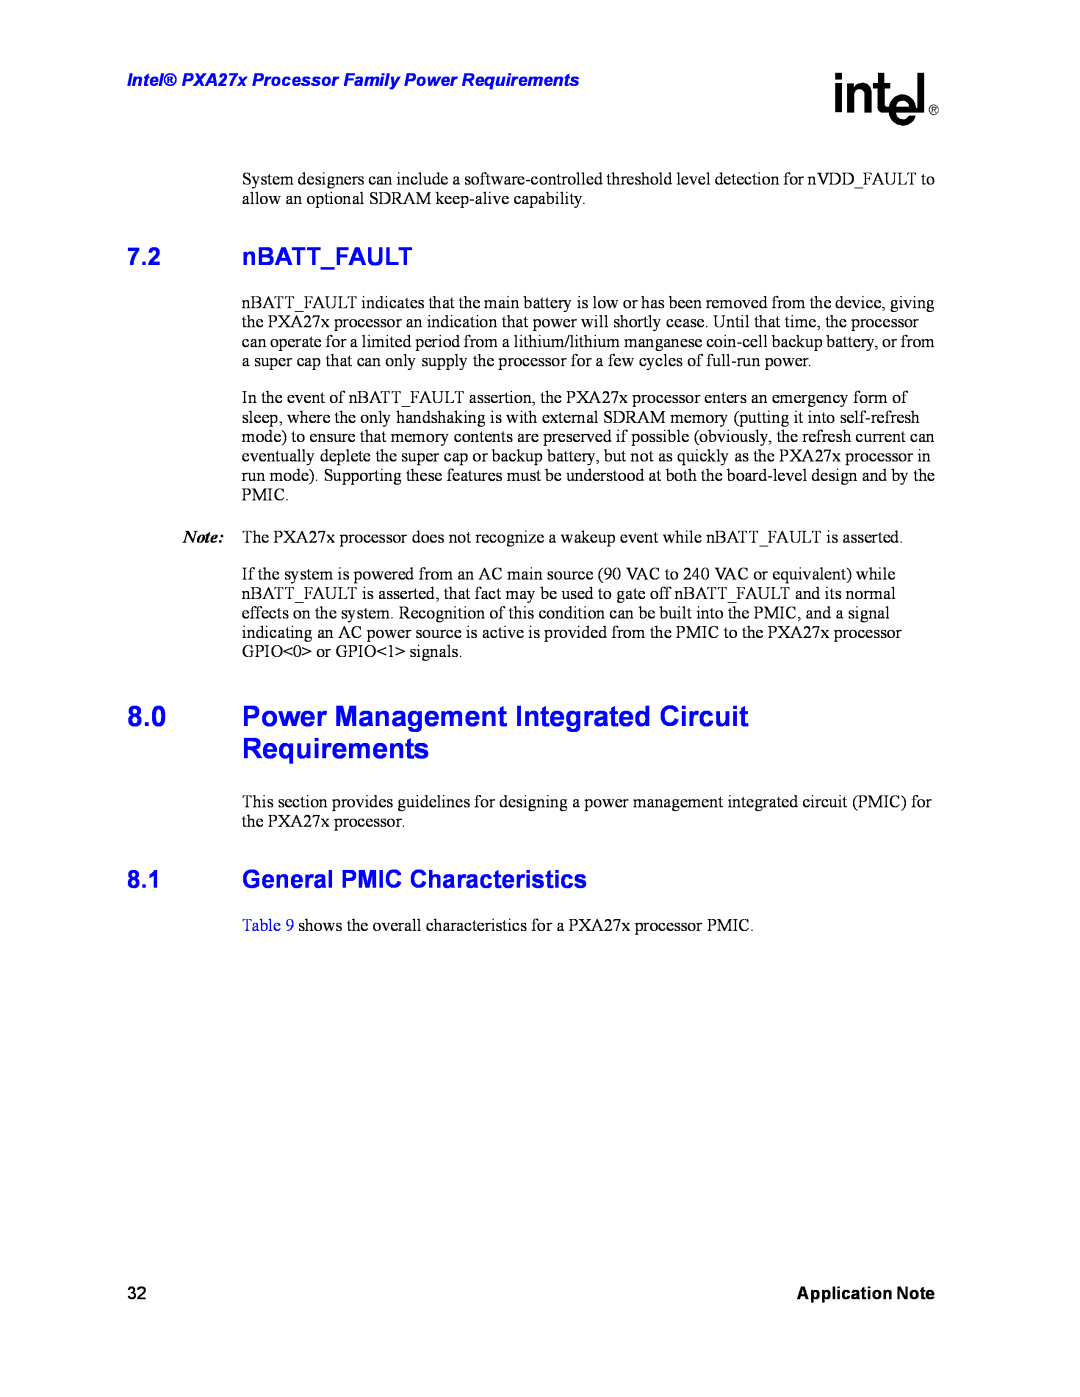 Intel PXA27X Power Management Integrated Circuit Requirements, nBATTFAULT, General PMIC Characteristics, Application Note 